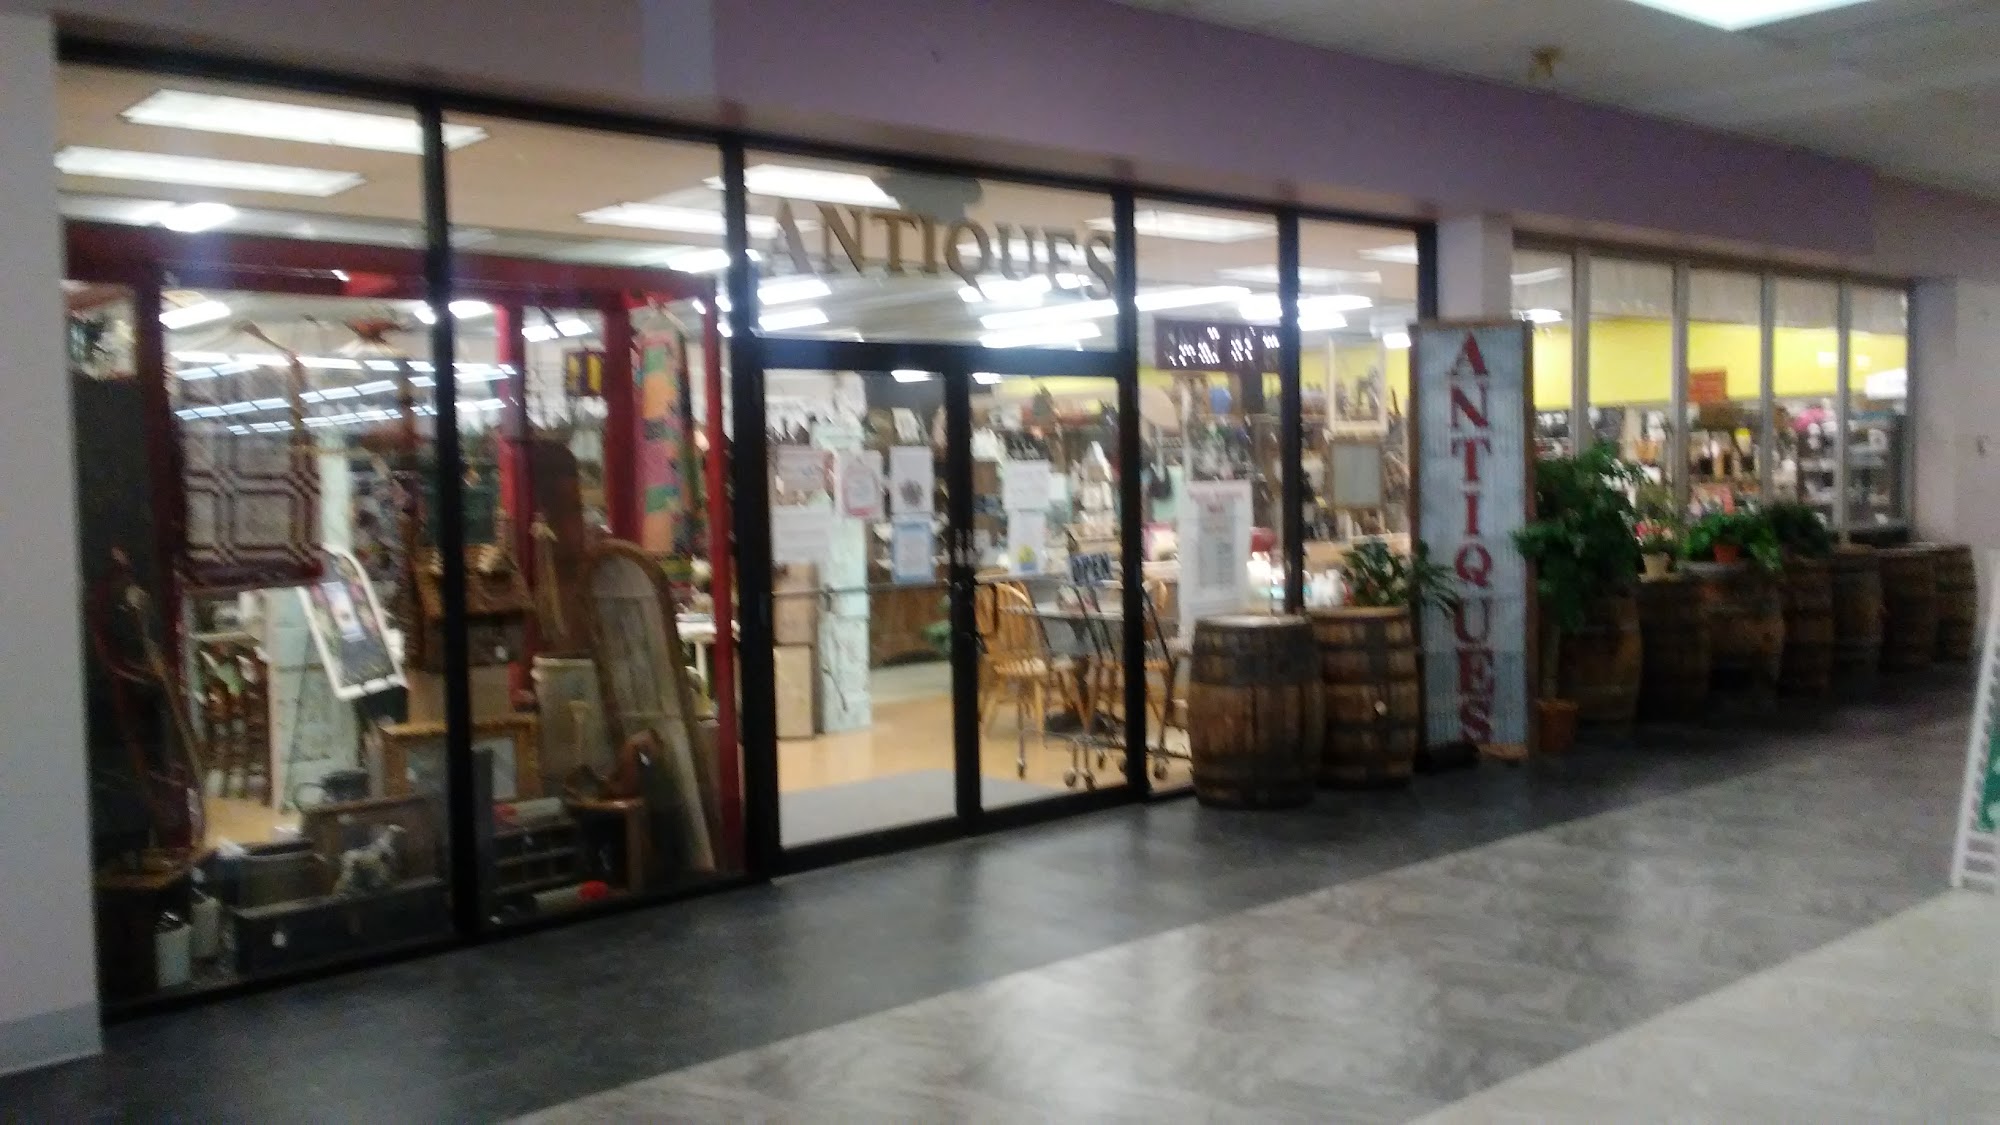 Taylor Antique Mall